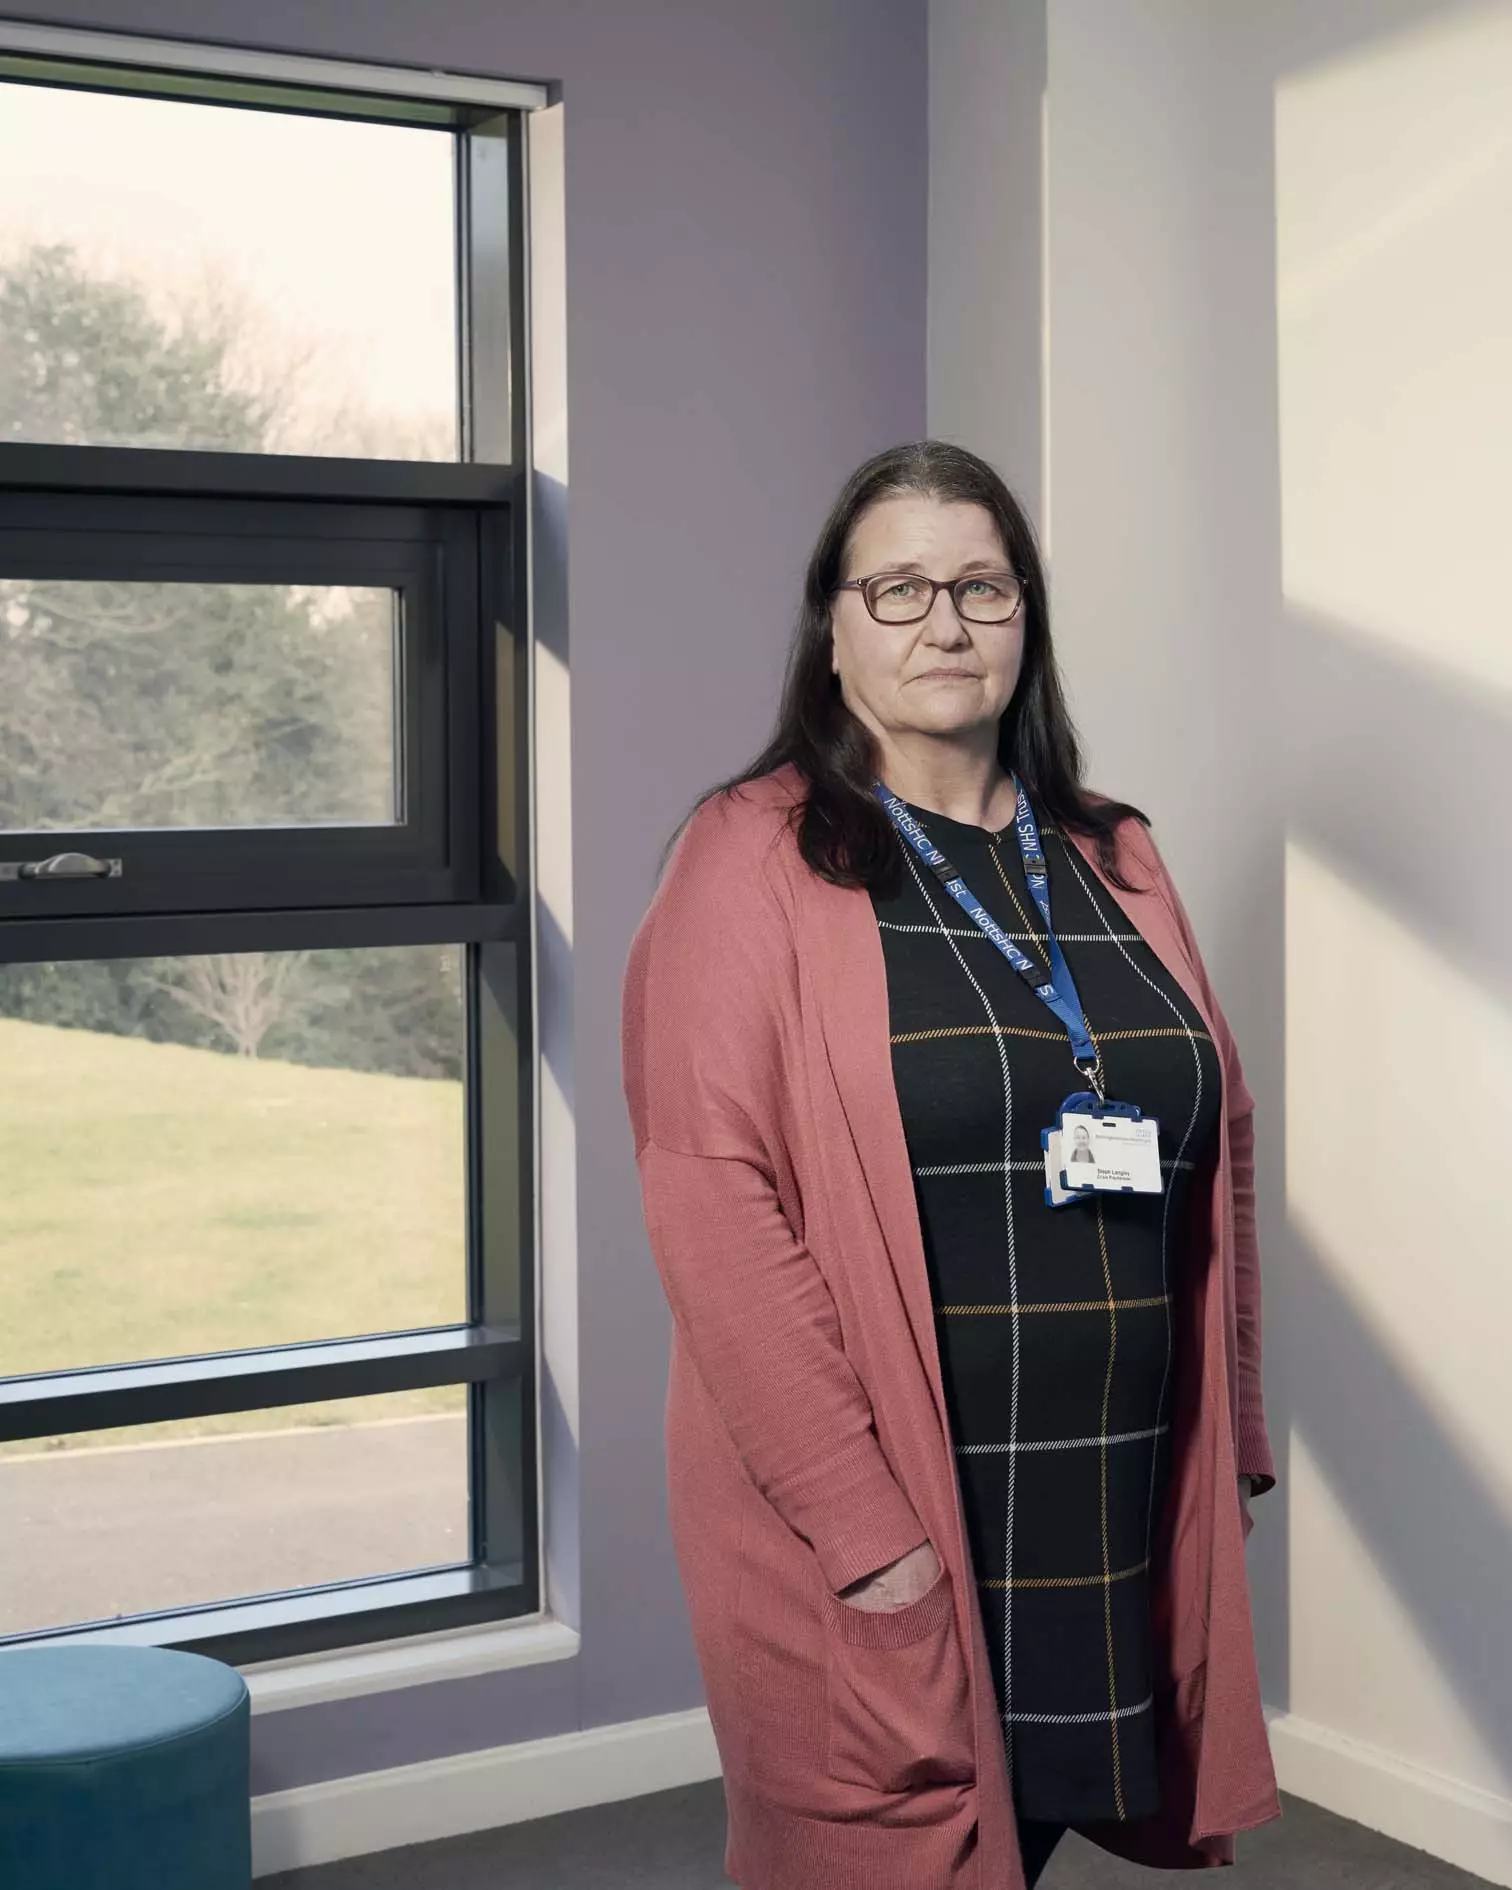 The series follows Nottinghamshire NHS Trust as they try to help patients suffering with mental health conditions (